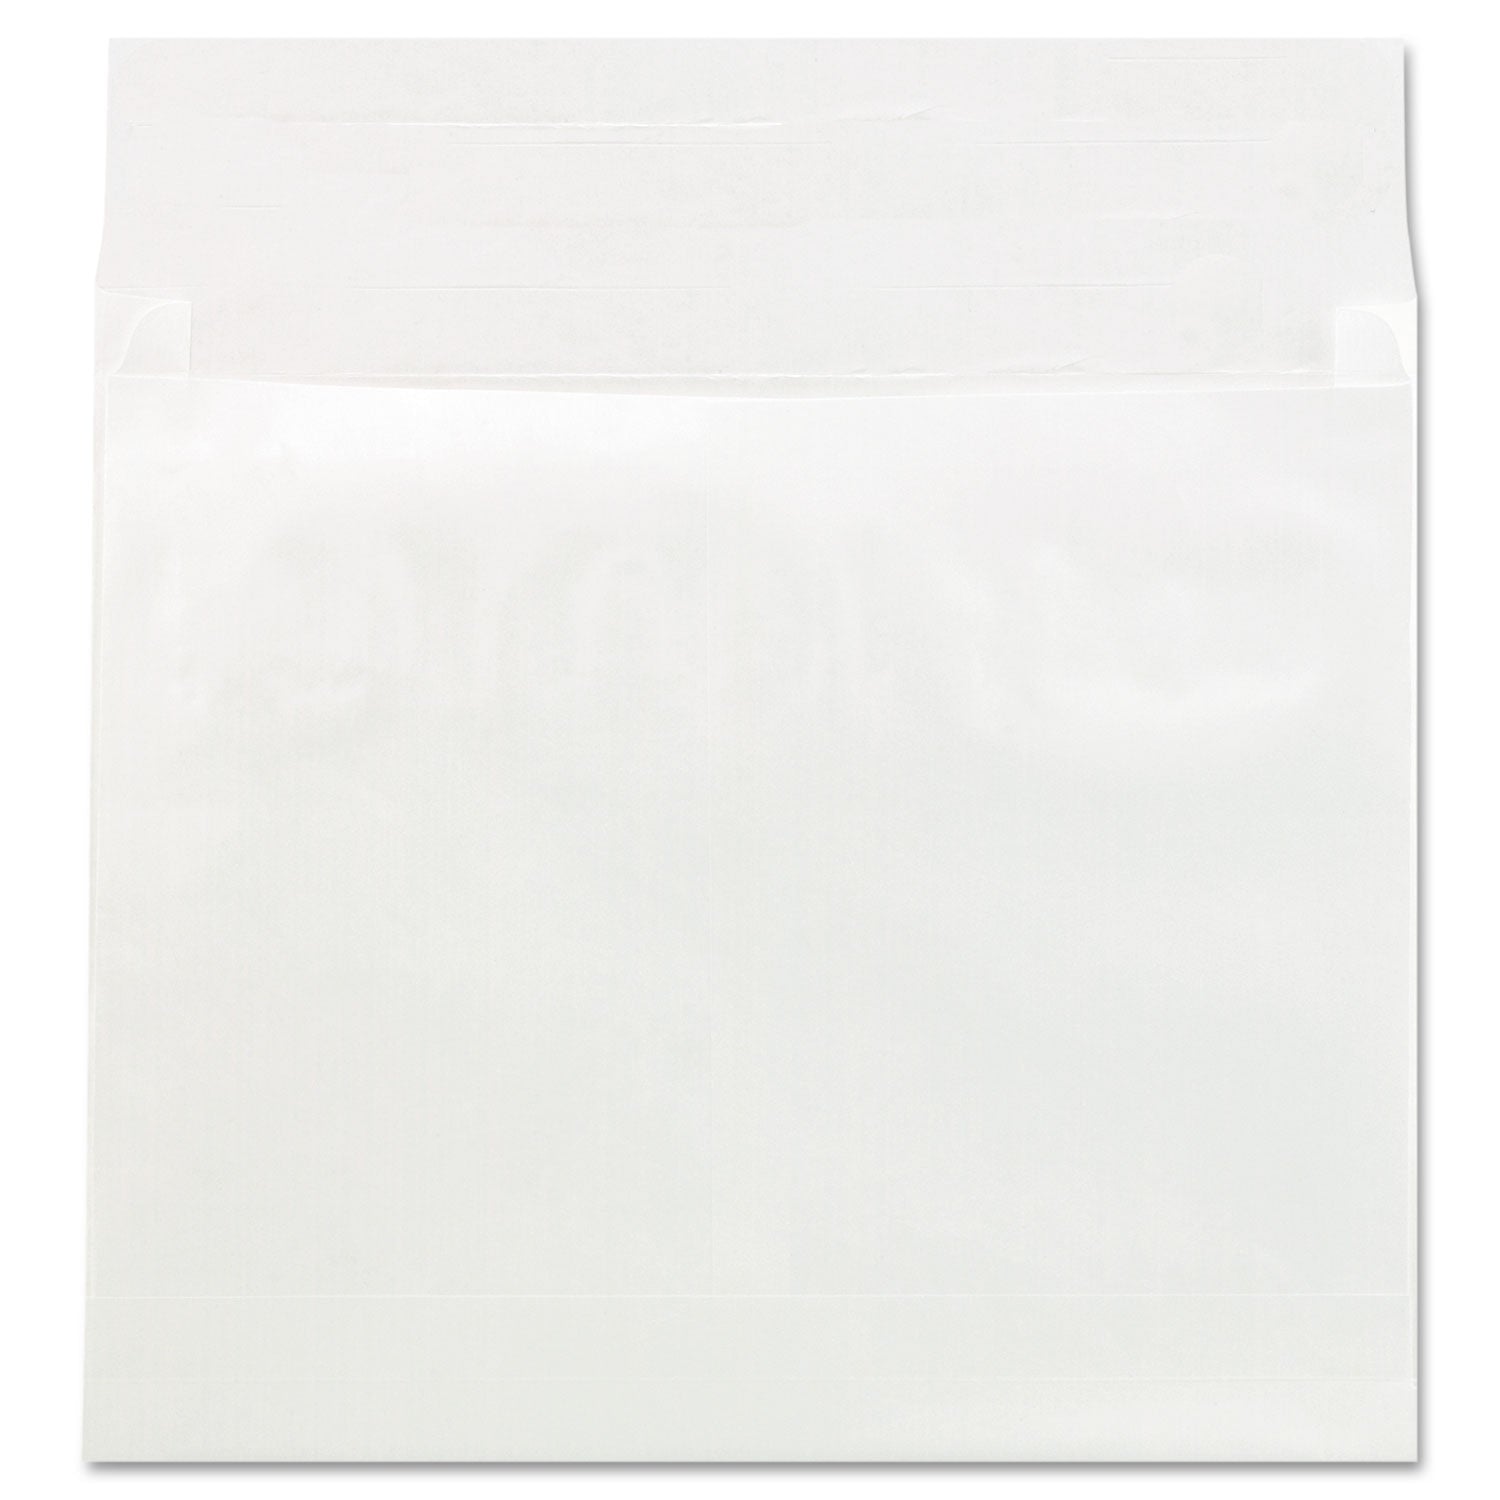 Deluxe Tyvek Expansion Envelopes, Open-Side, 4" Capacity, #15 1/2, Square Flap, Self-Adhesive Closure, 12 x 16, White, 50/CT - 